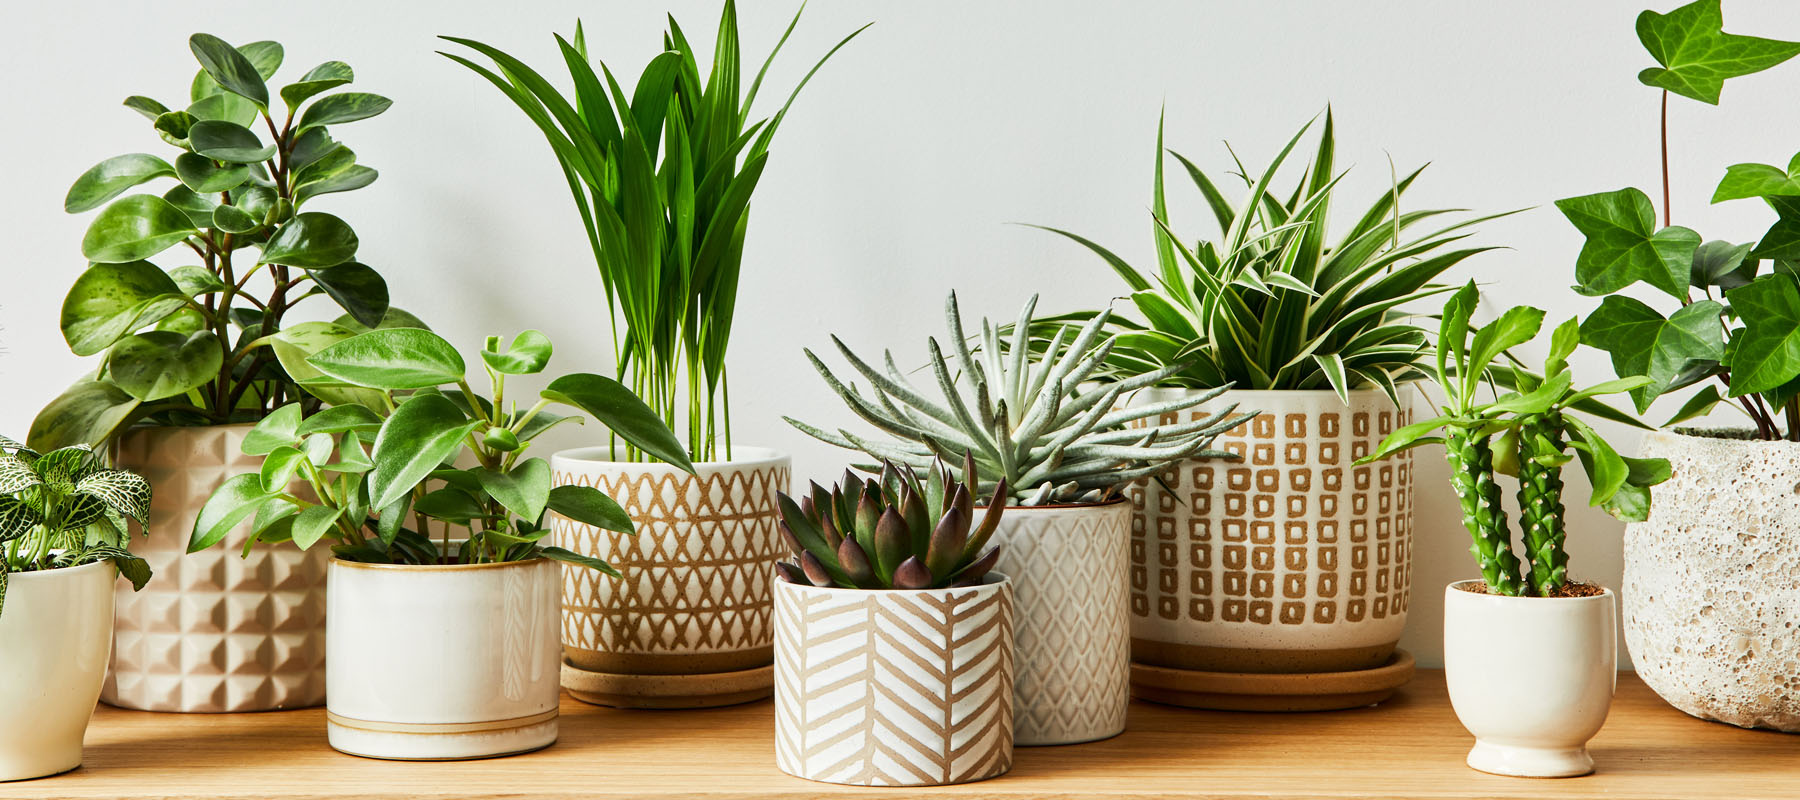 Our favourite houseplants